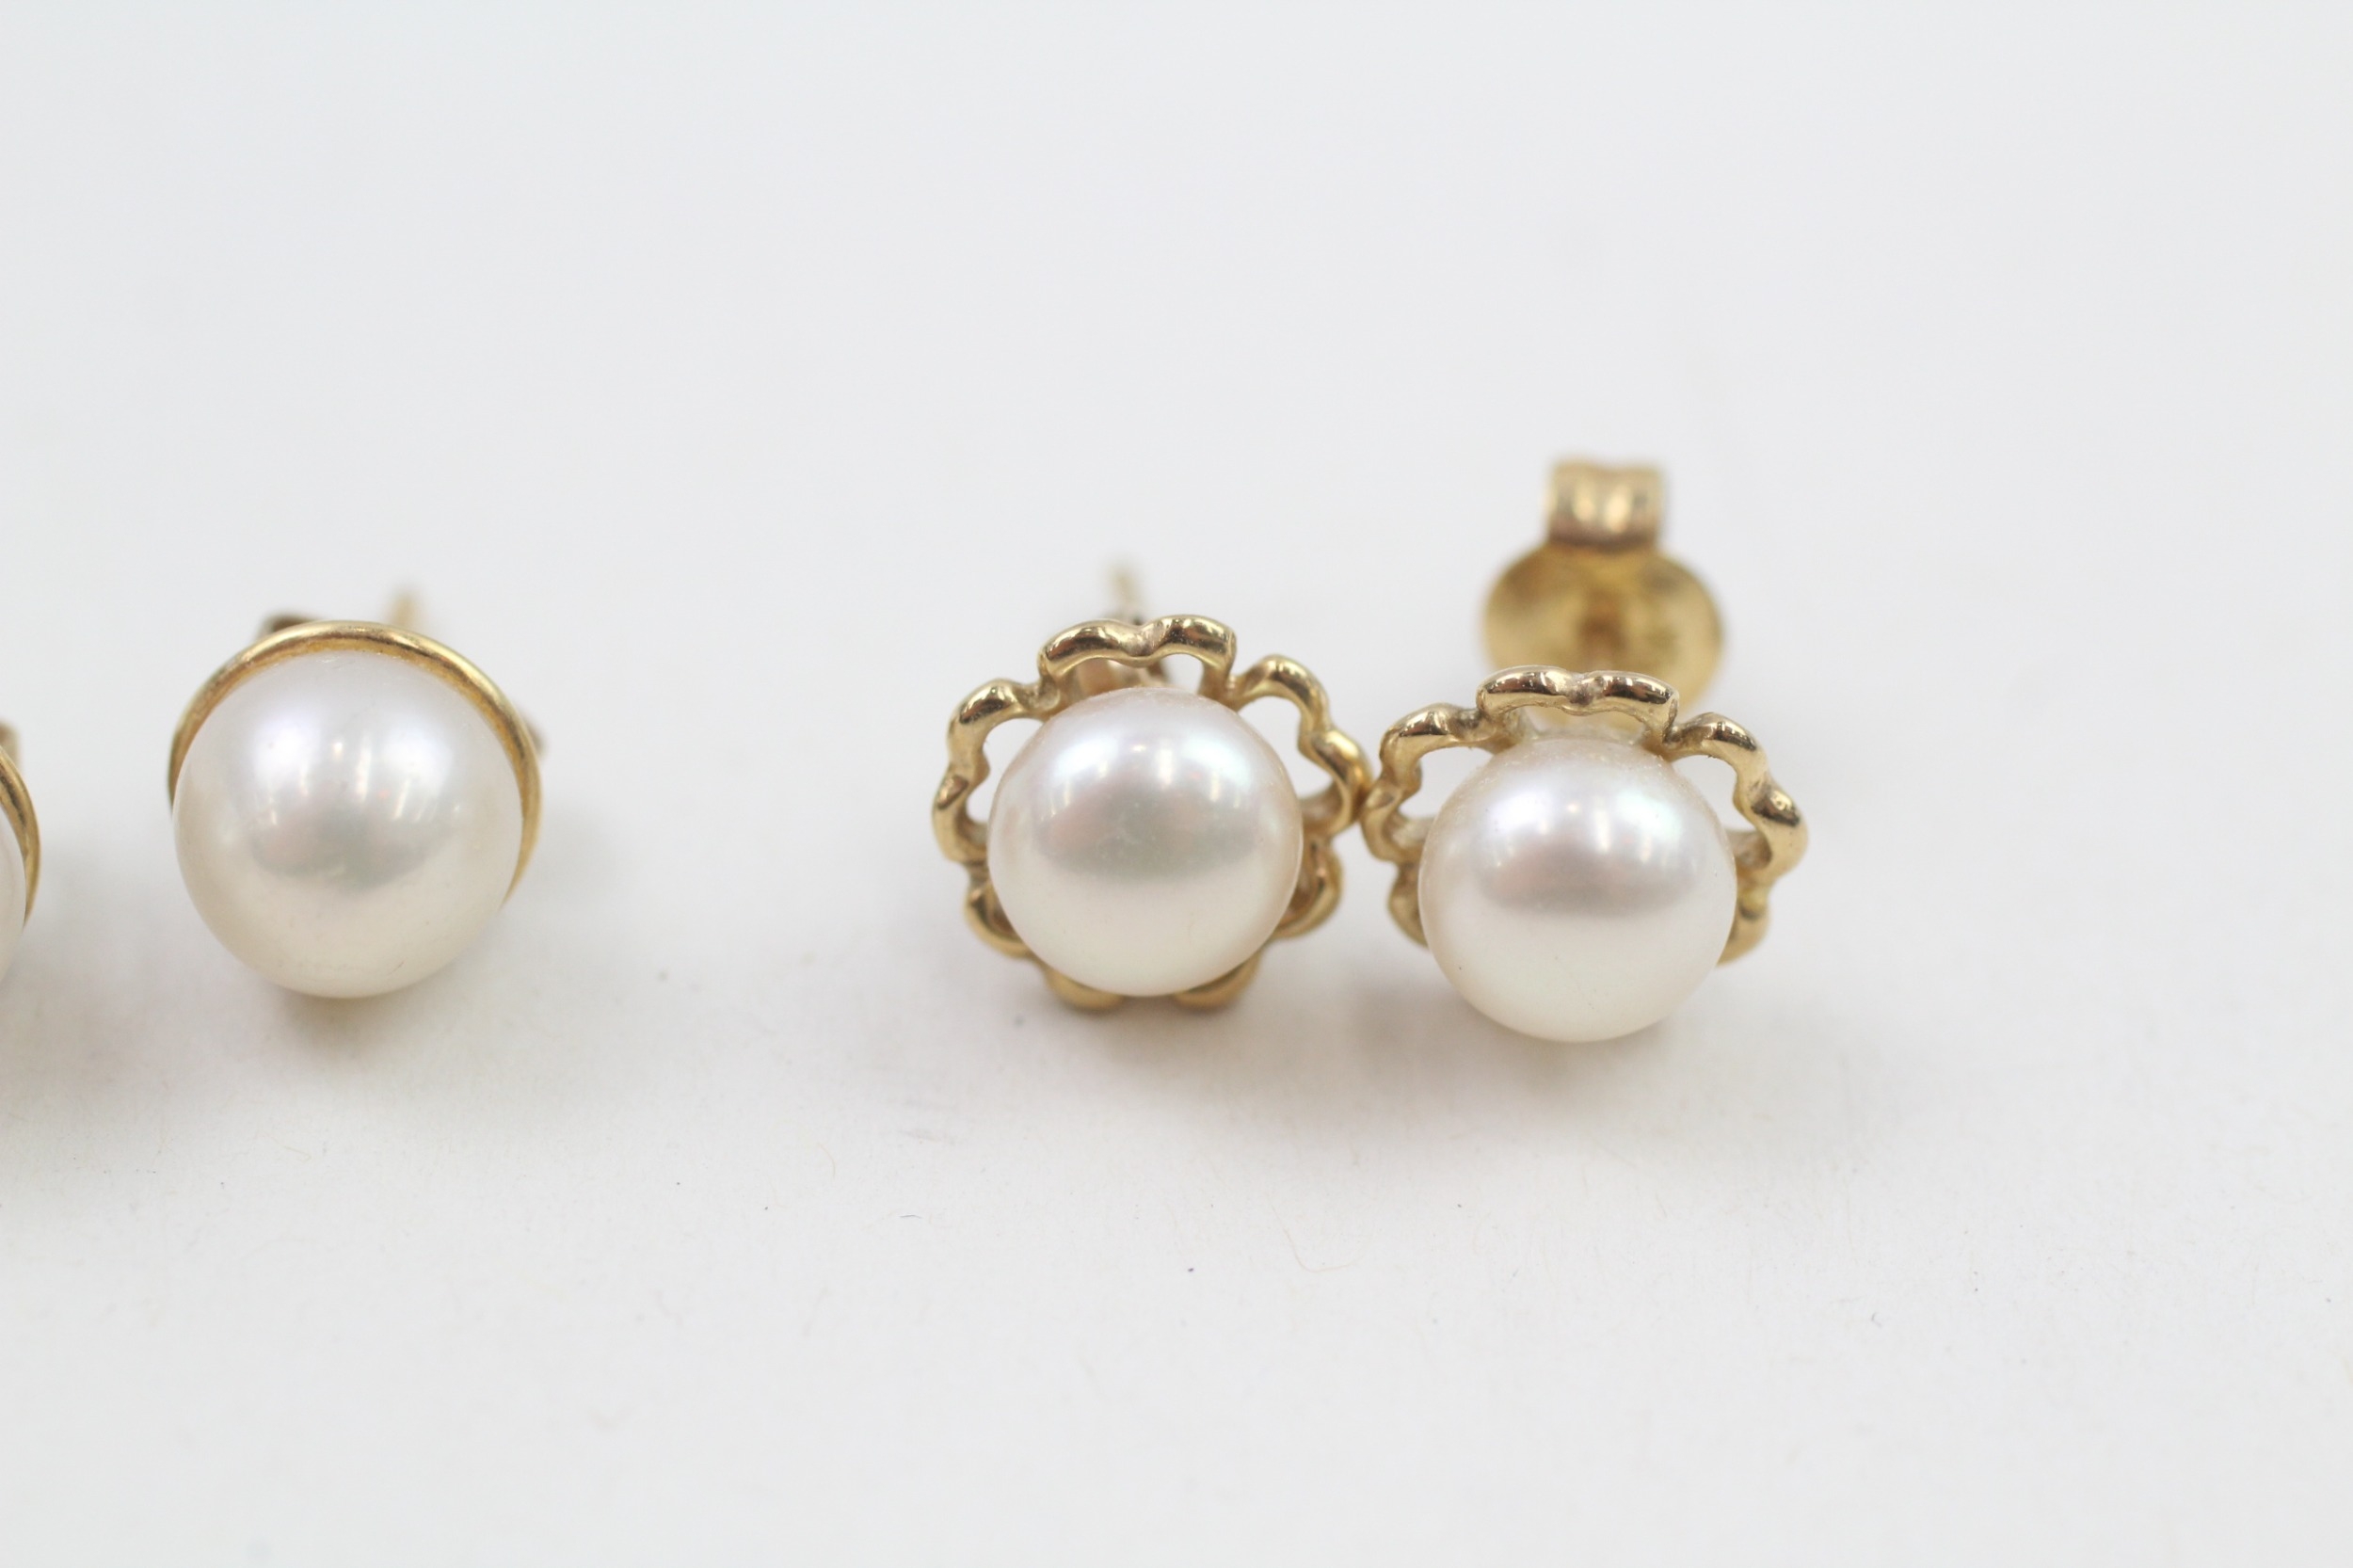 2x 9ct gold pearl earrings (3.8g) - Image 3 of 3